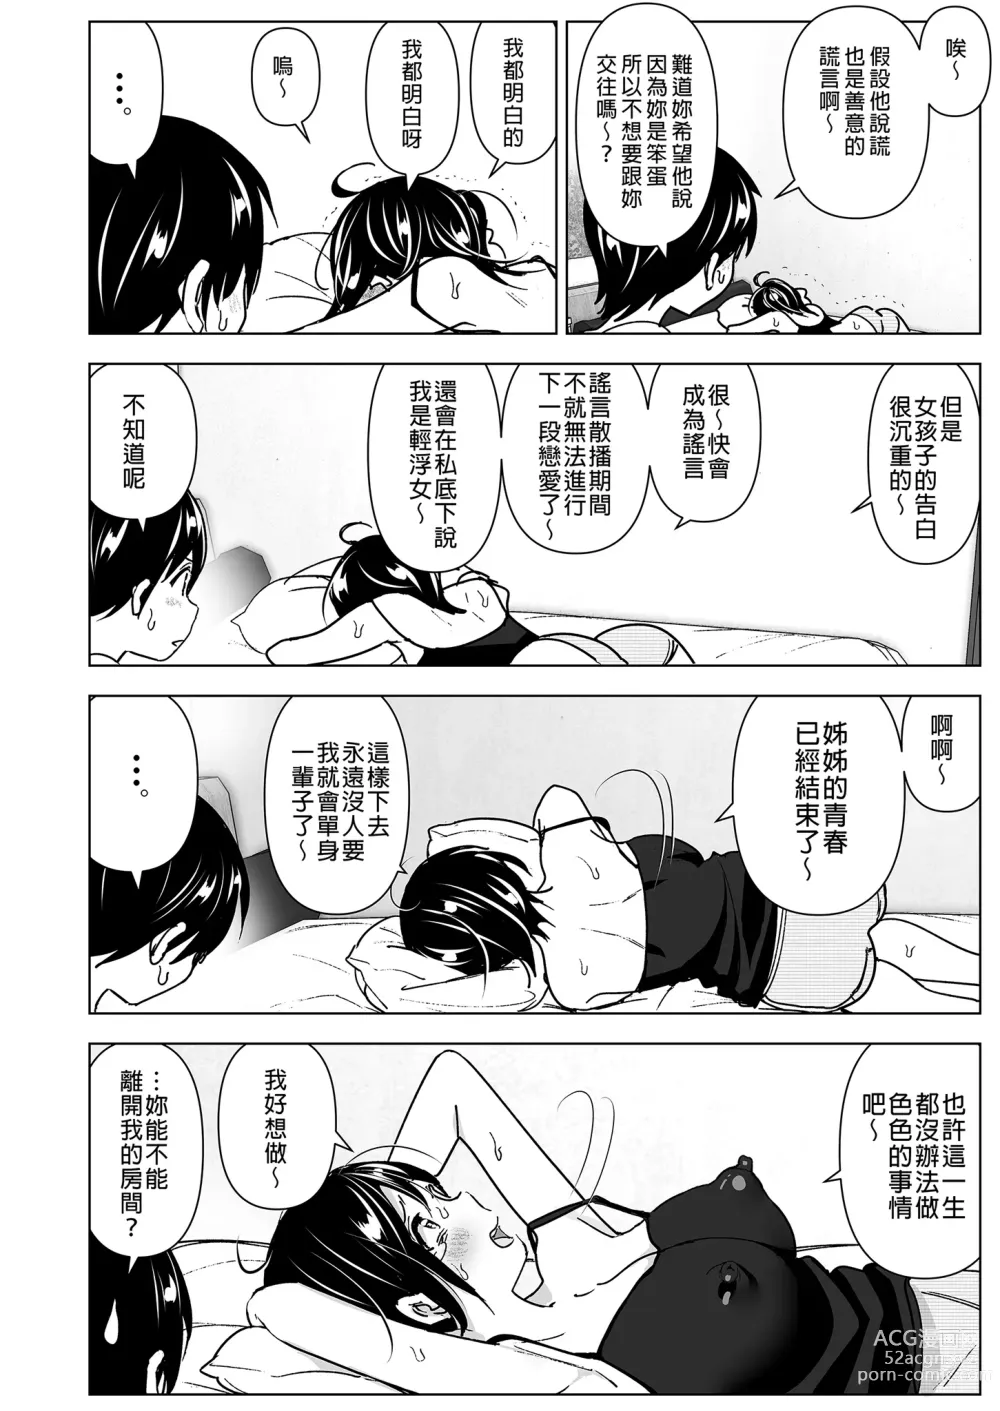 Page 4 of doujinshi 姊姊與傾聽怨言的弟弟